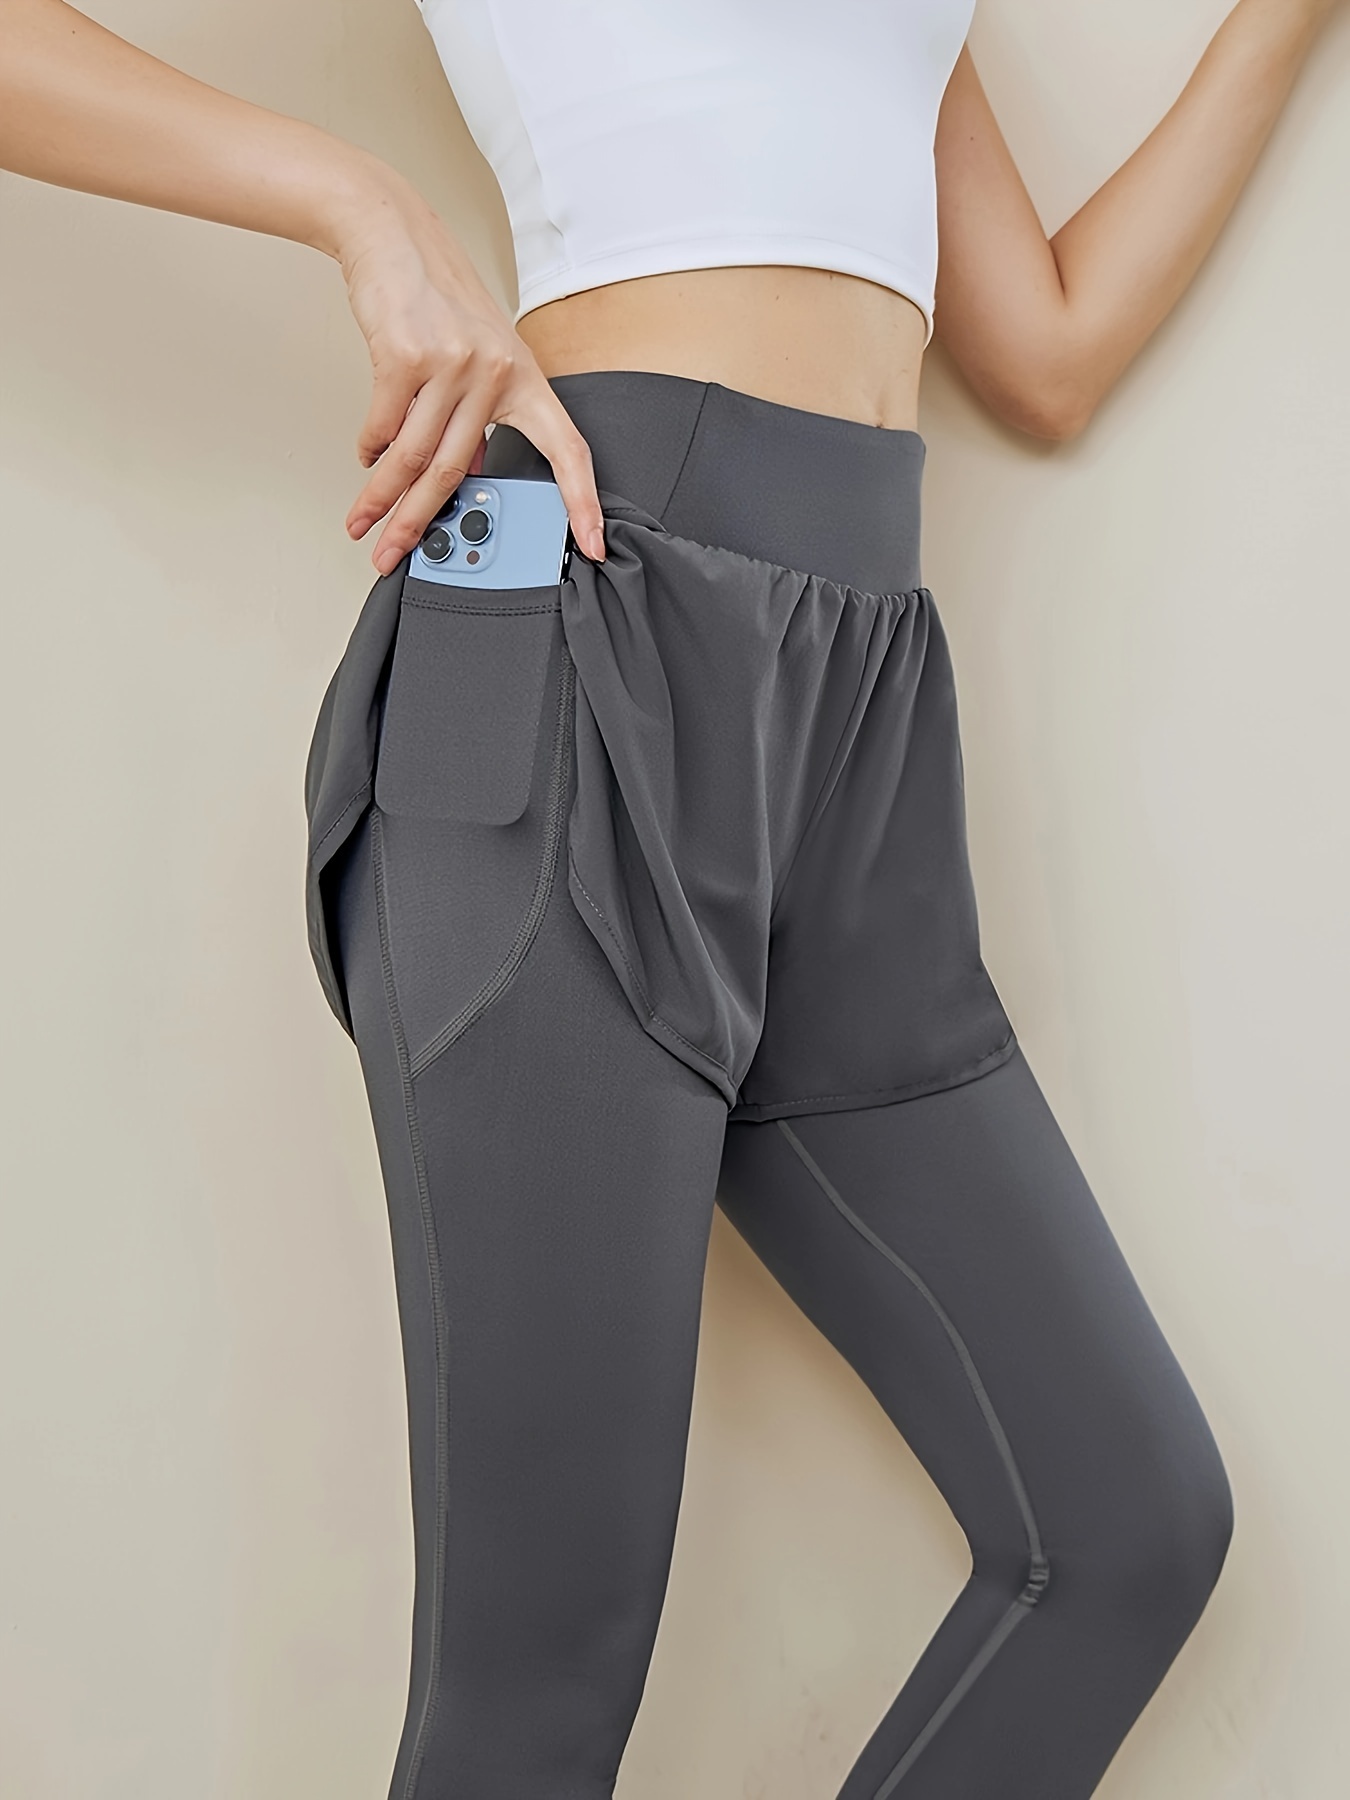 Women High Waisted Yoga Pants for Women with Pockets Tummy Control